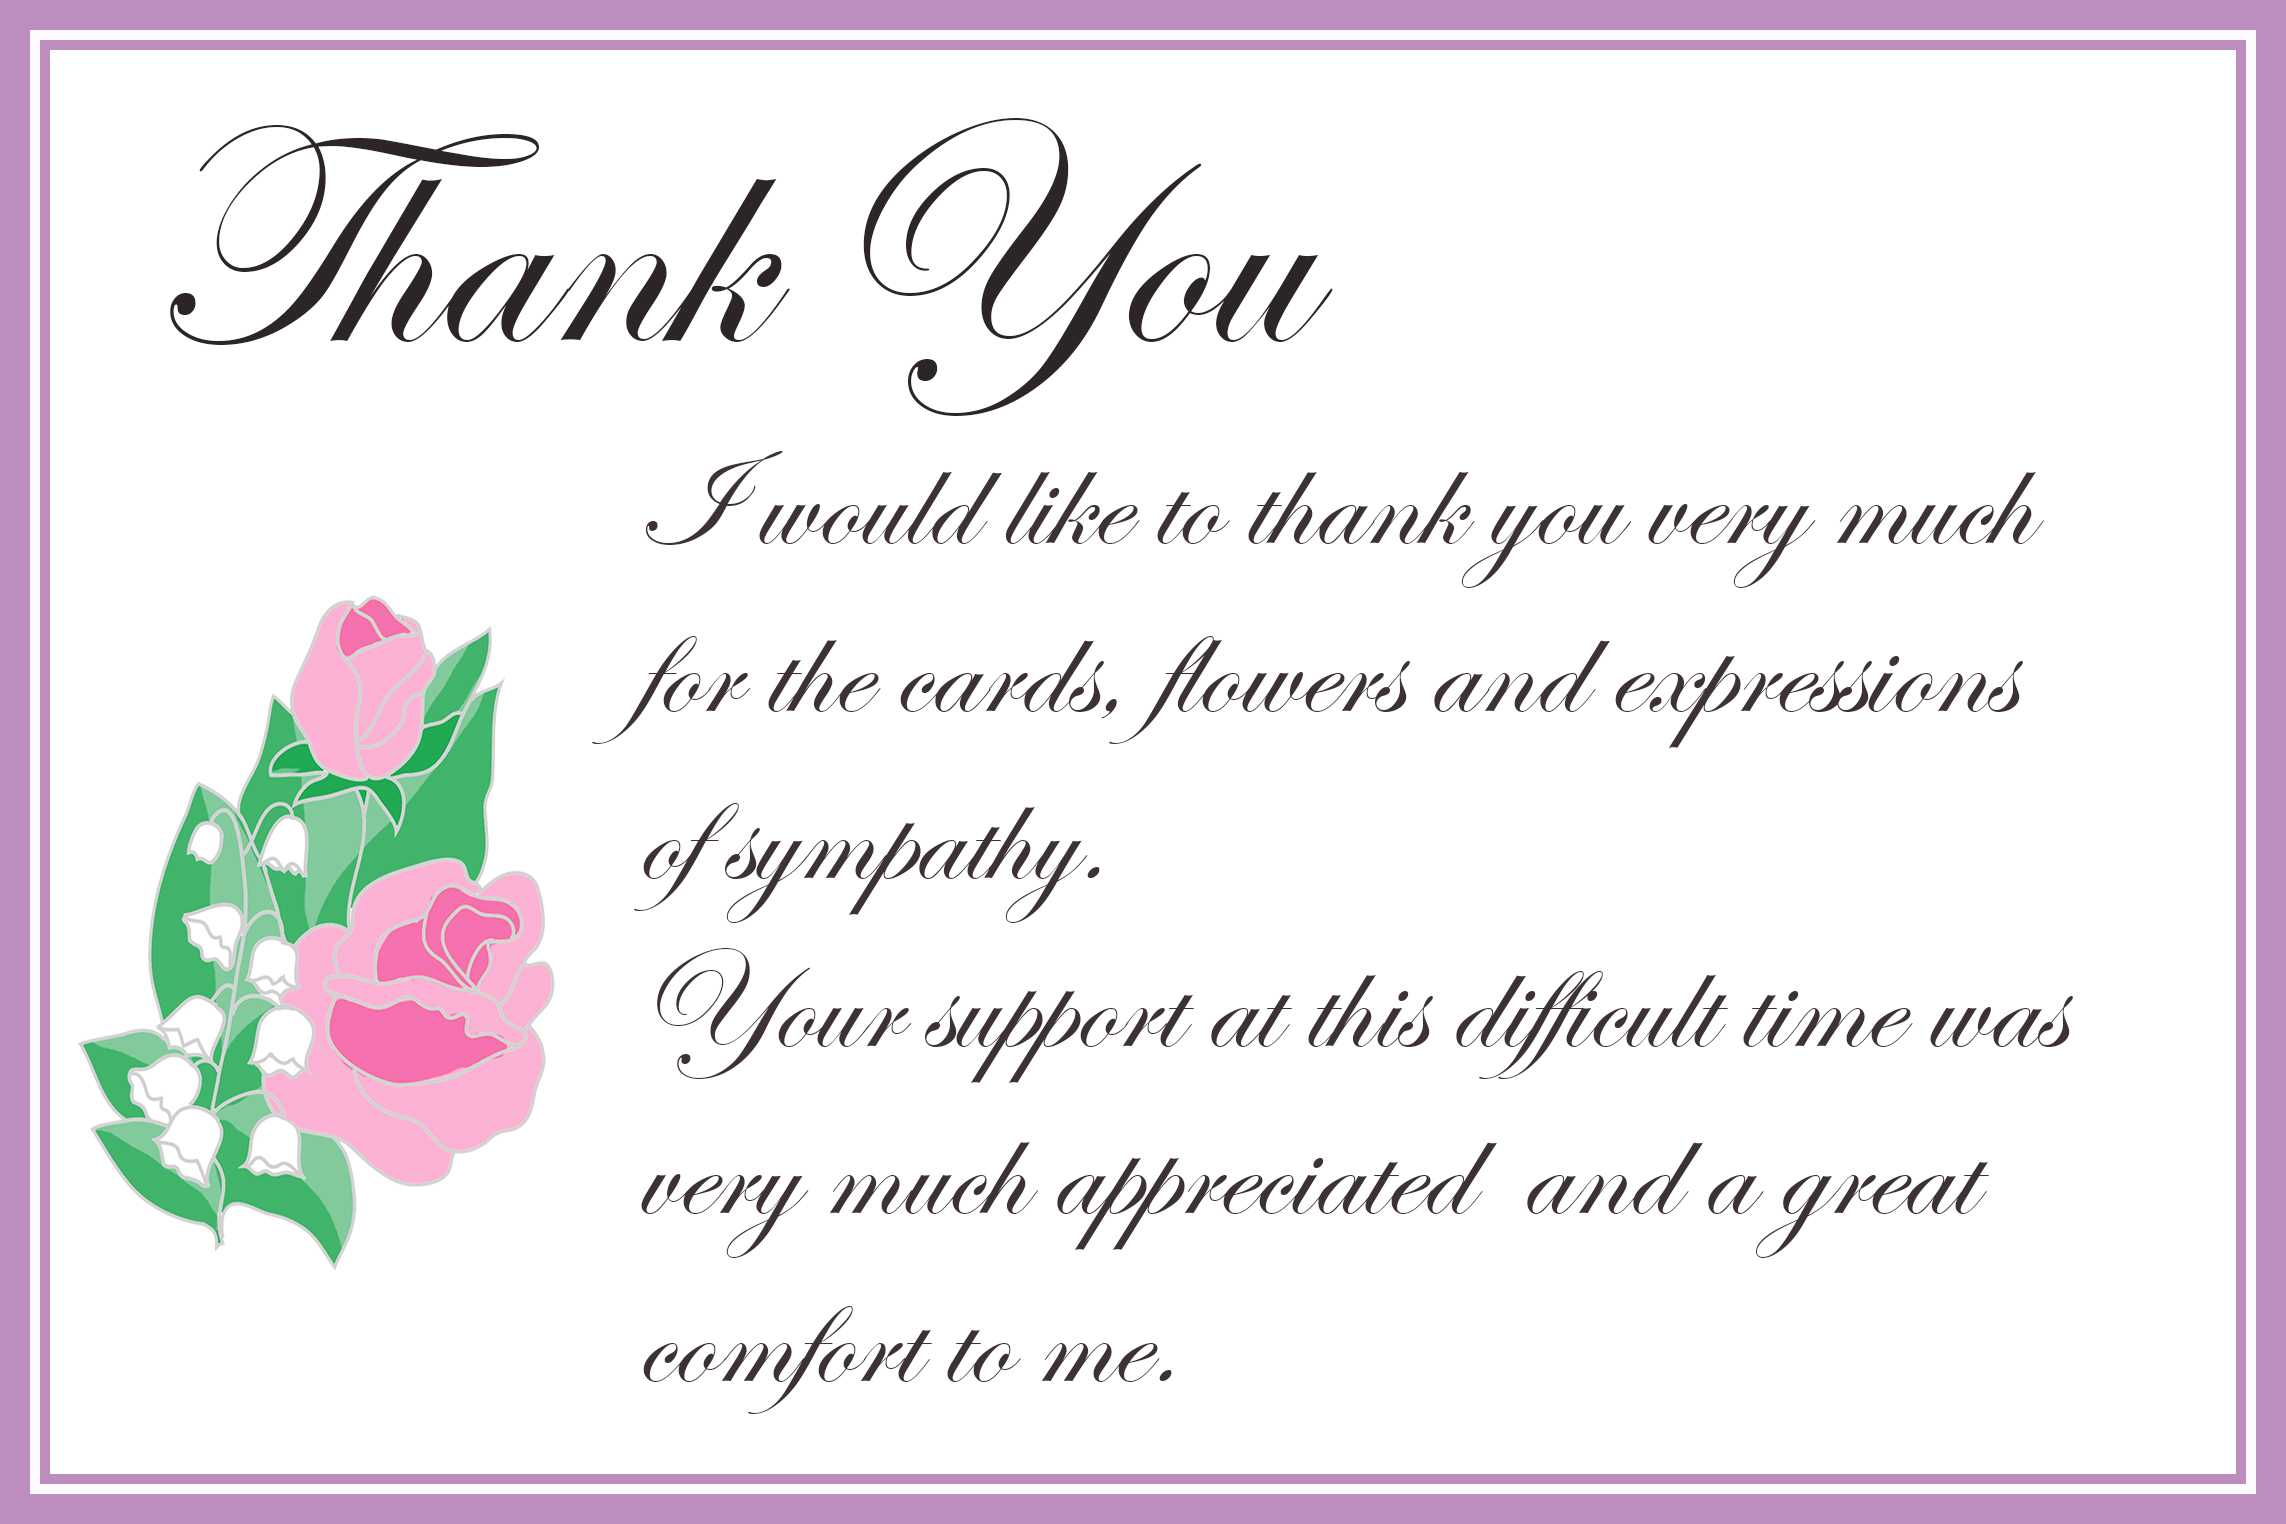 Printable Thank You Cards – Free Printable Greeting Cards With Sympathy Thank You Card Template